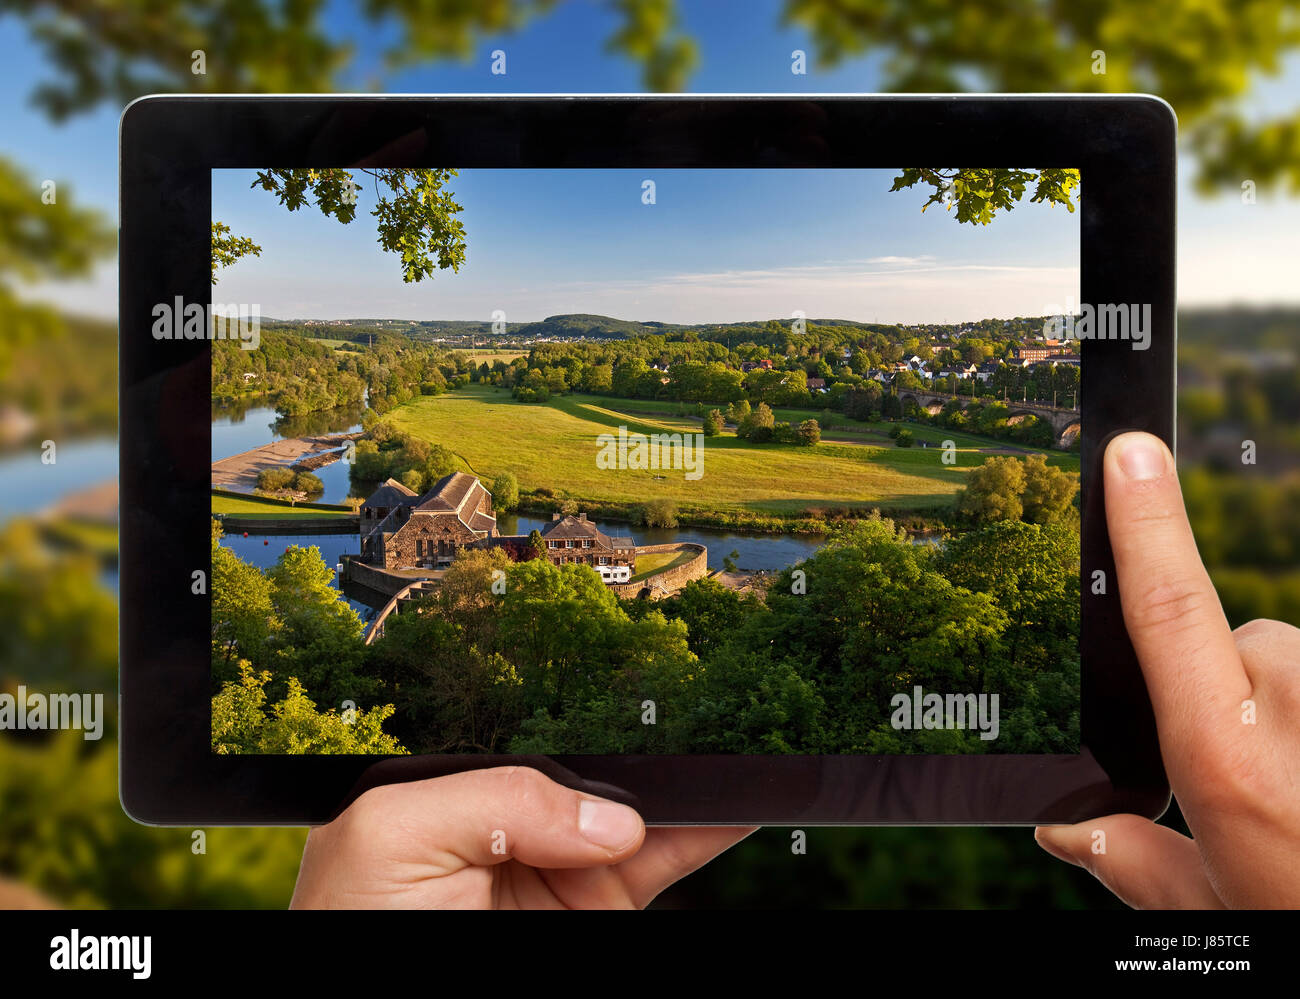 Hands holding tablet pc, with photo of Ruhr valley, Witten, Ruhr area, North Rhine-Westphalia, Germany Stock Photo